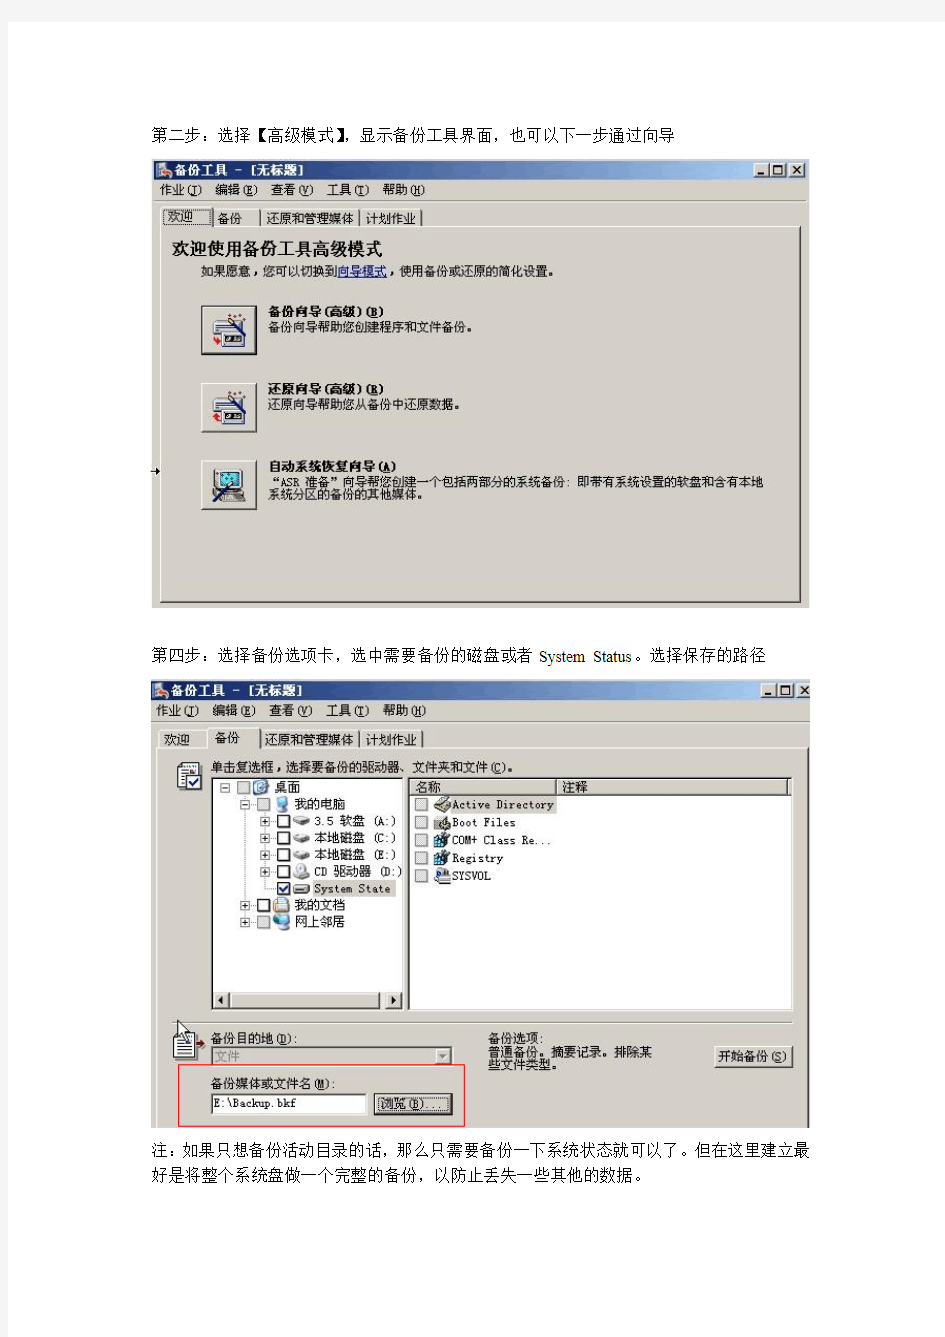 Active Directory 备份与还原